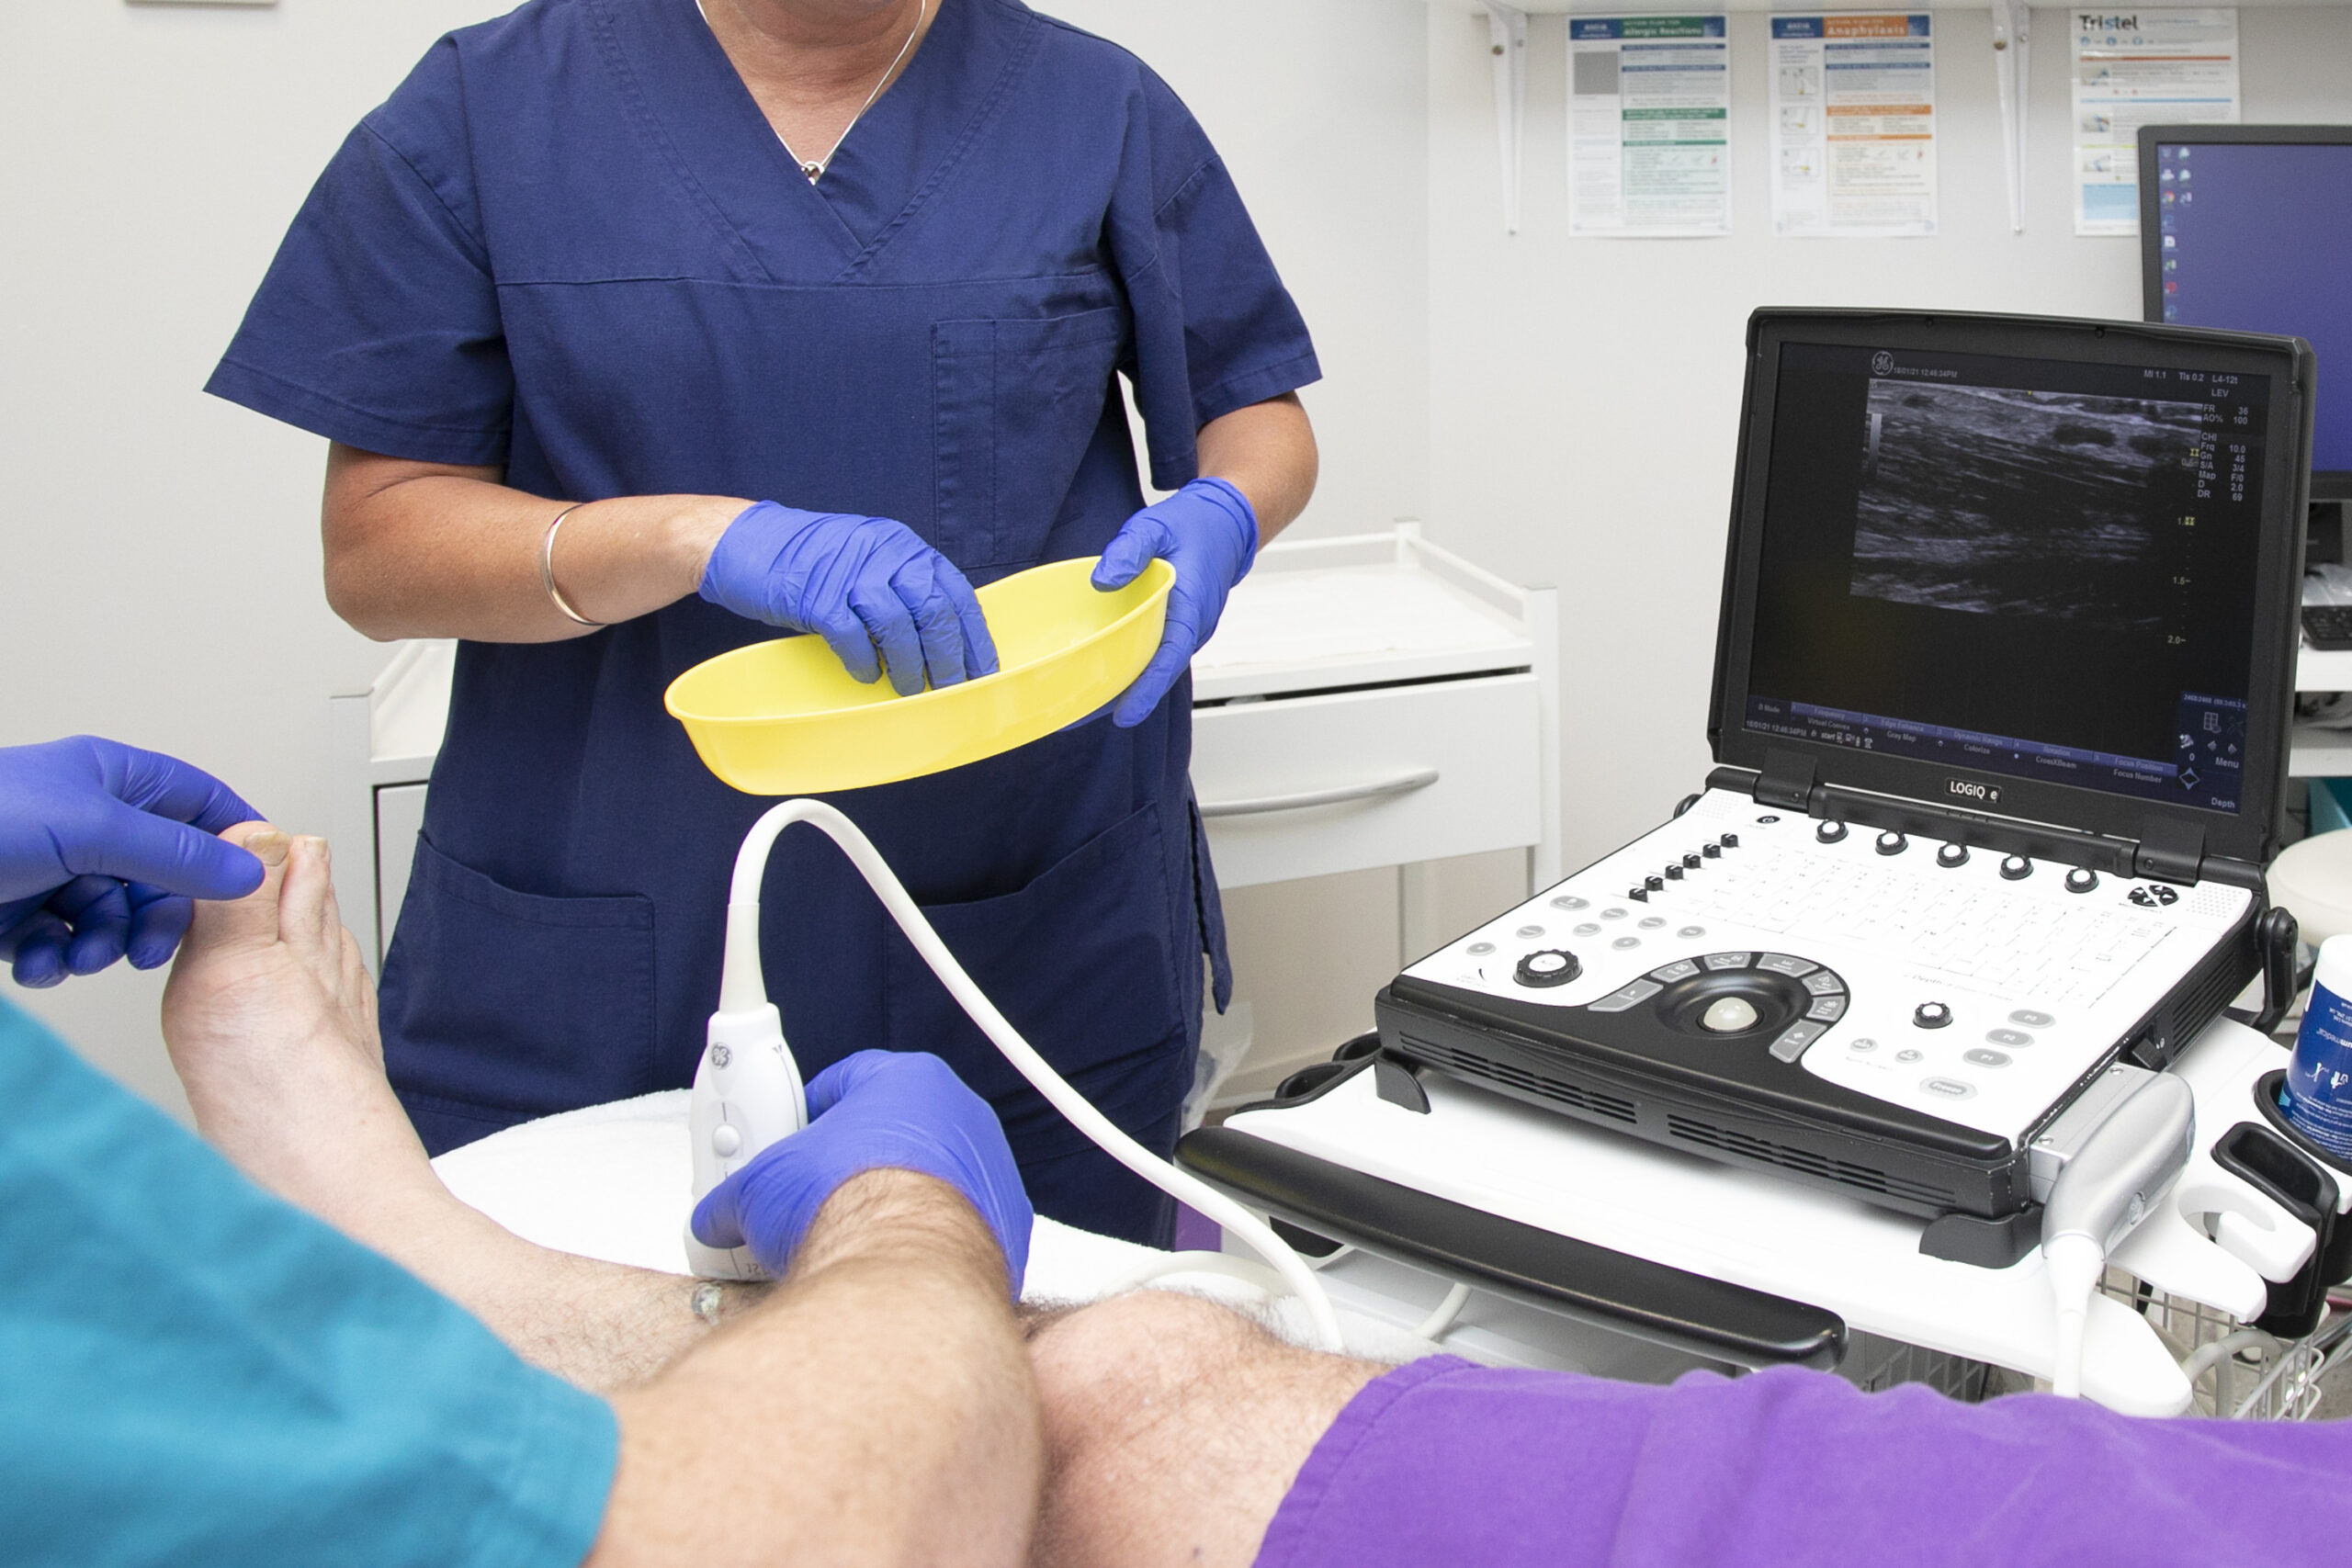 Your vascular specialist monitors your vein treatment using ultrasound.